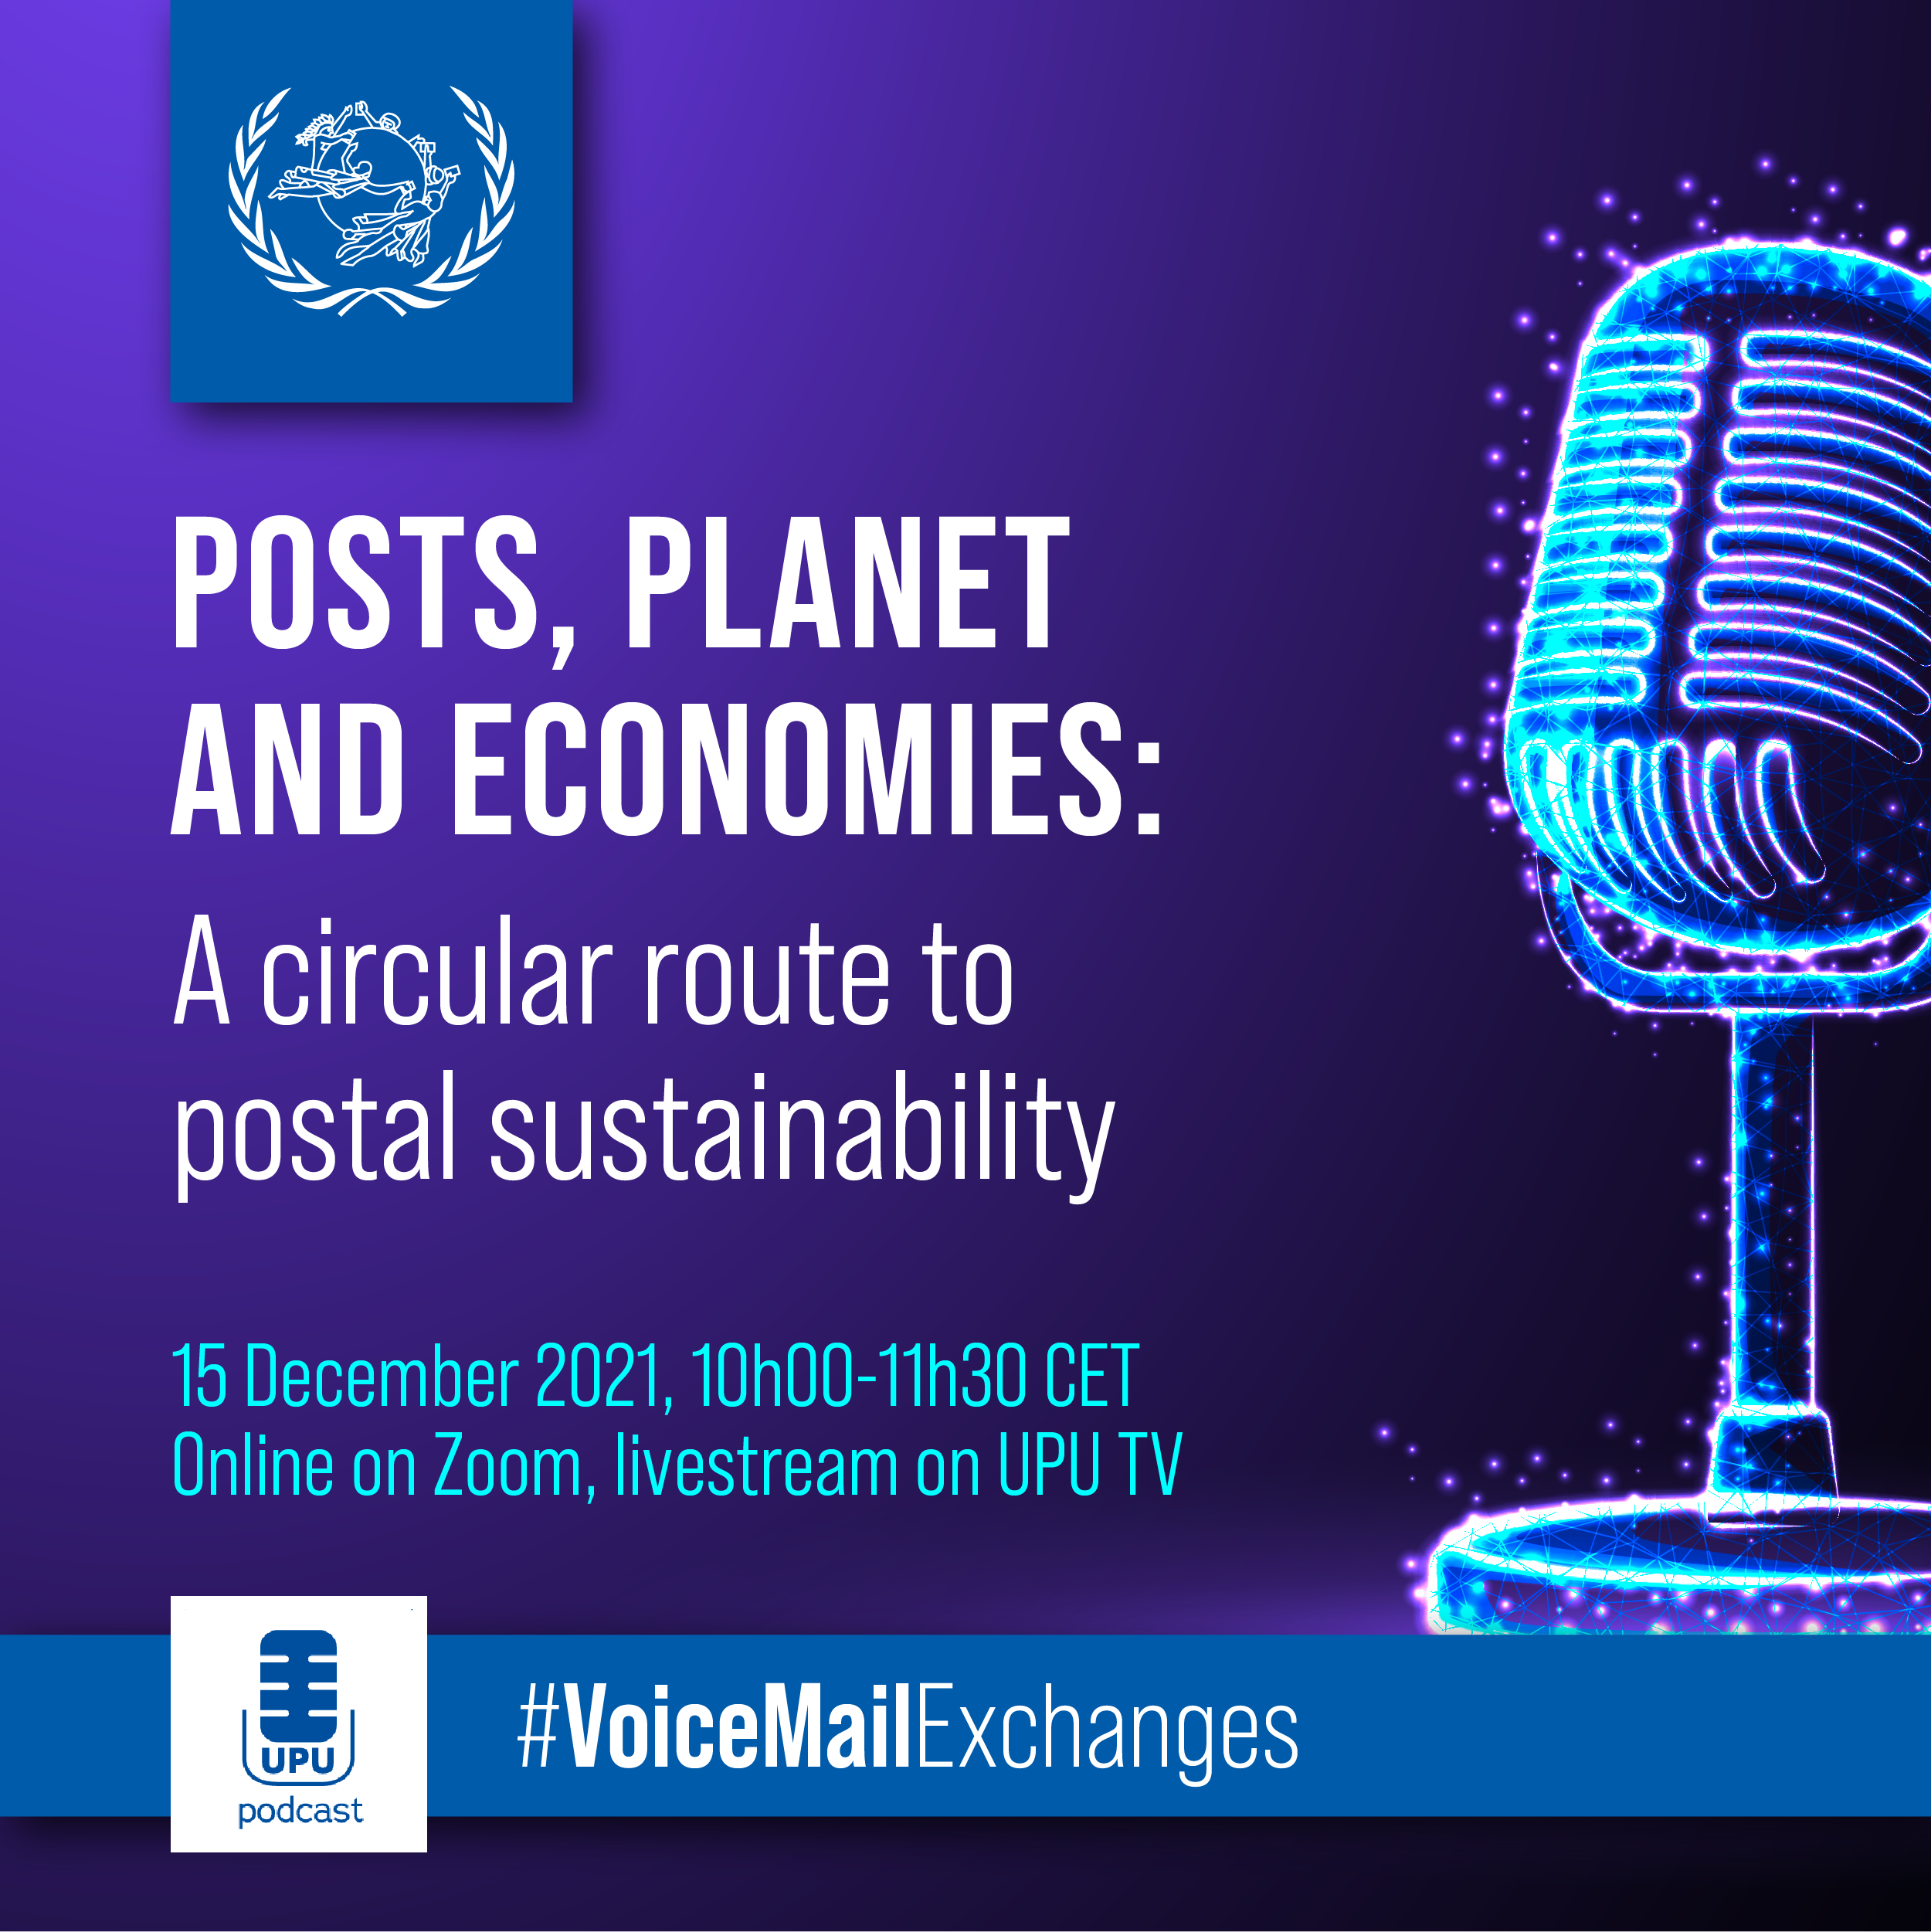 Posts, Planet and Economies: A circular route to postal sustainability